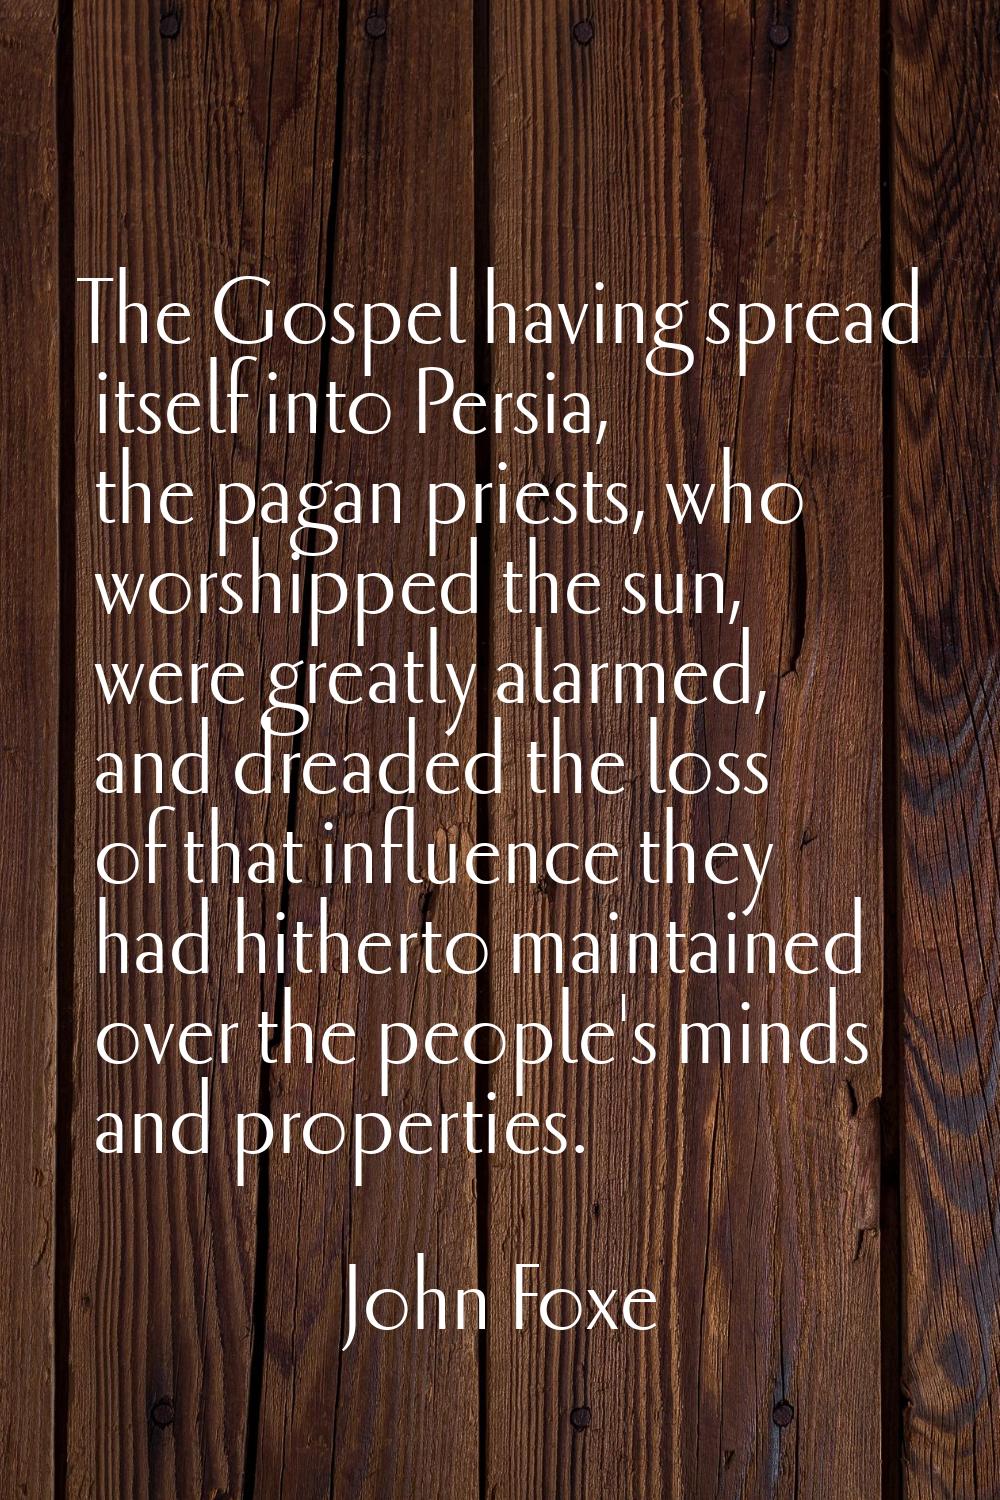 The Gospel having spread itself into Persia, the pagan priests, who worshipped the sun, were greatl